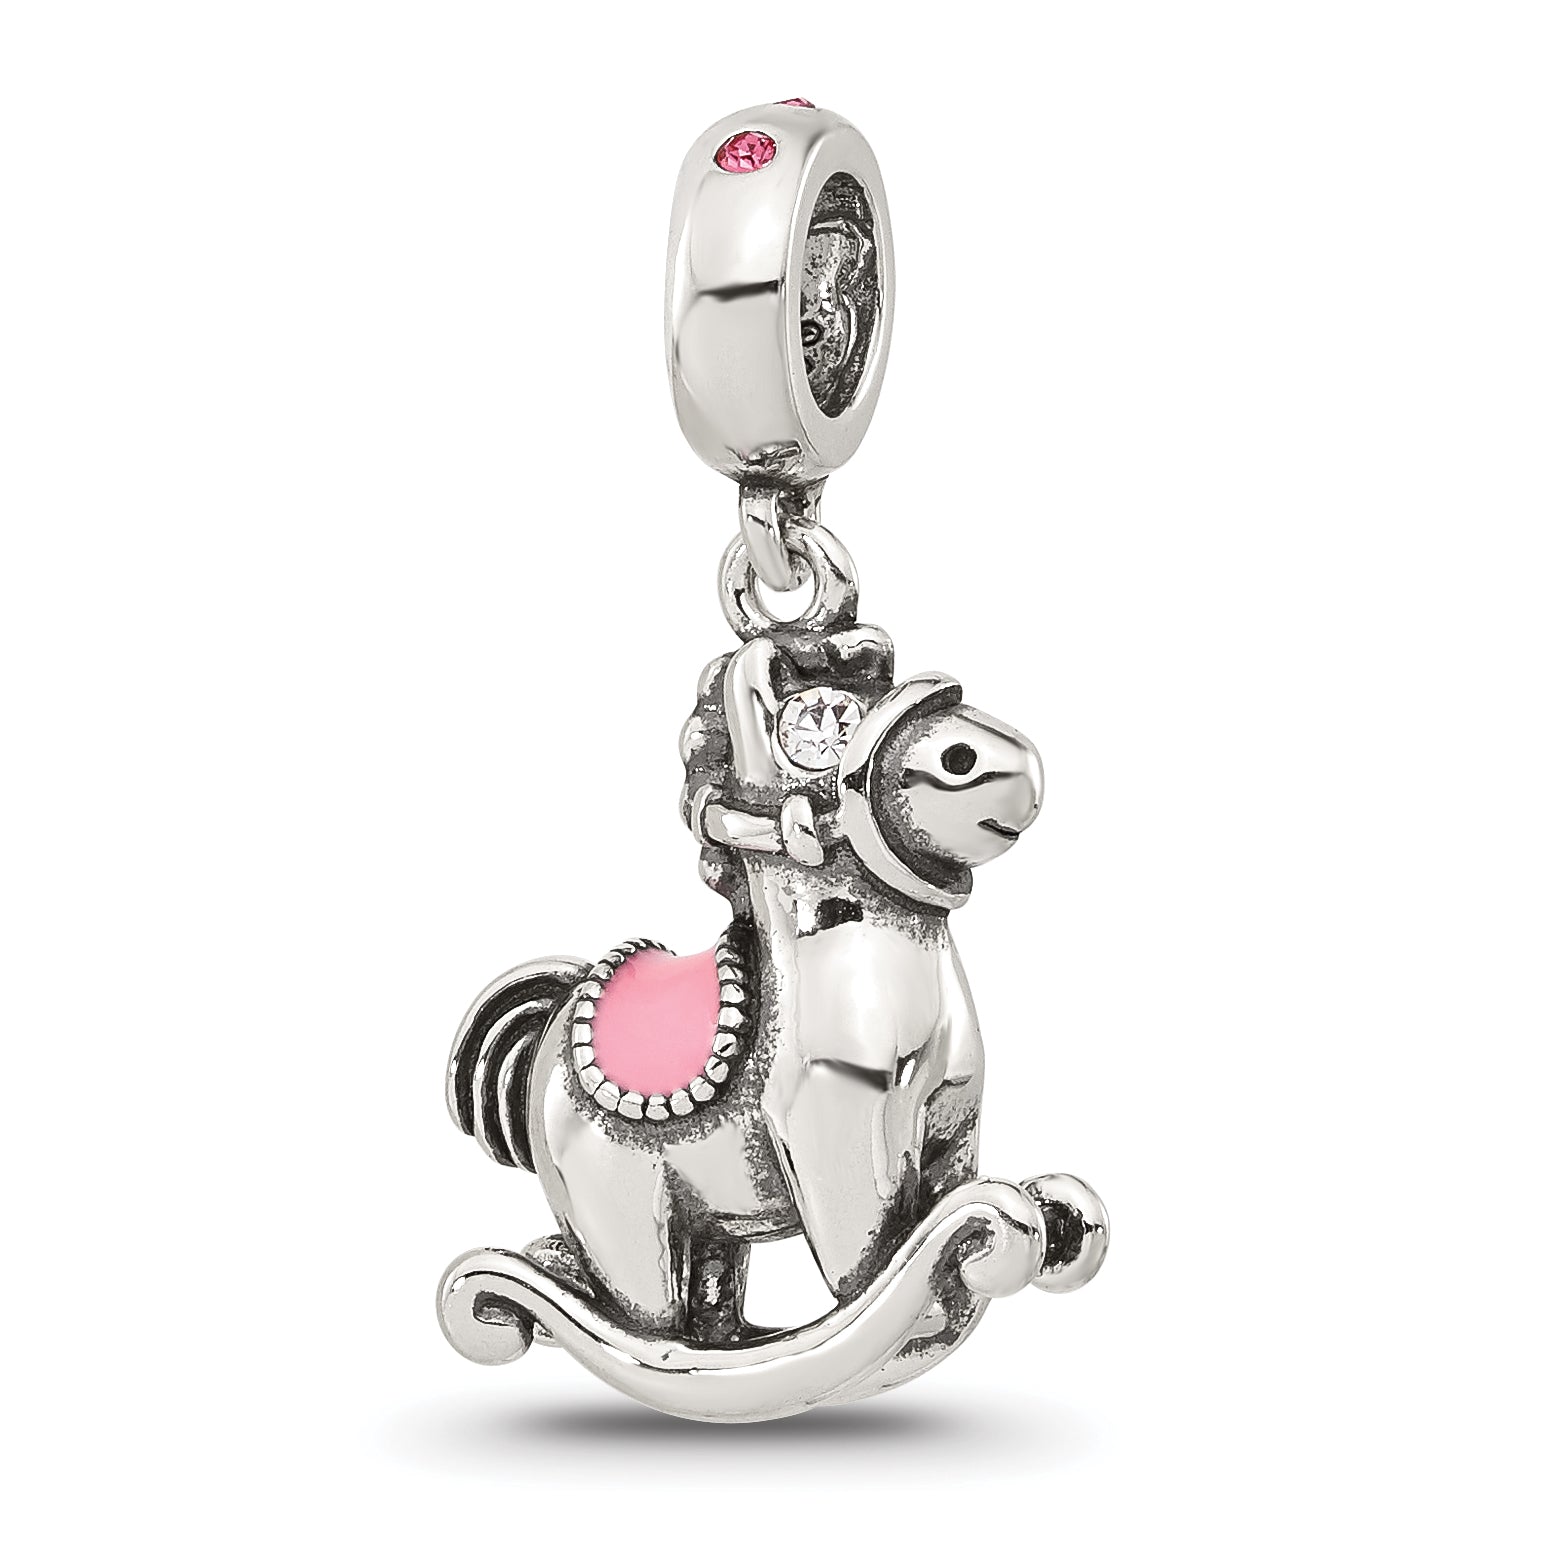 Sterling Silver Reflections CZ & Enamel Rocking Horse Lob Clasp Bead